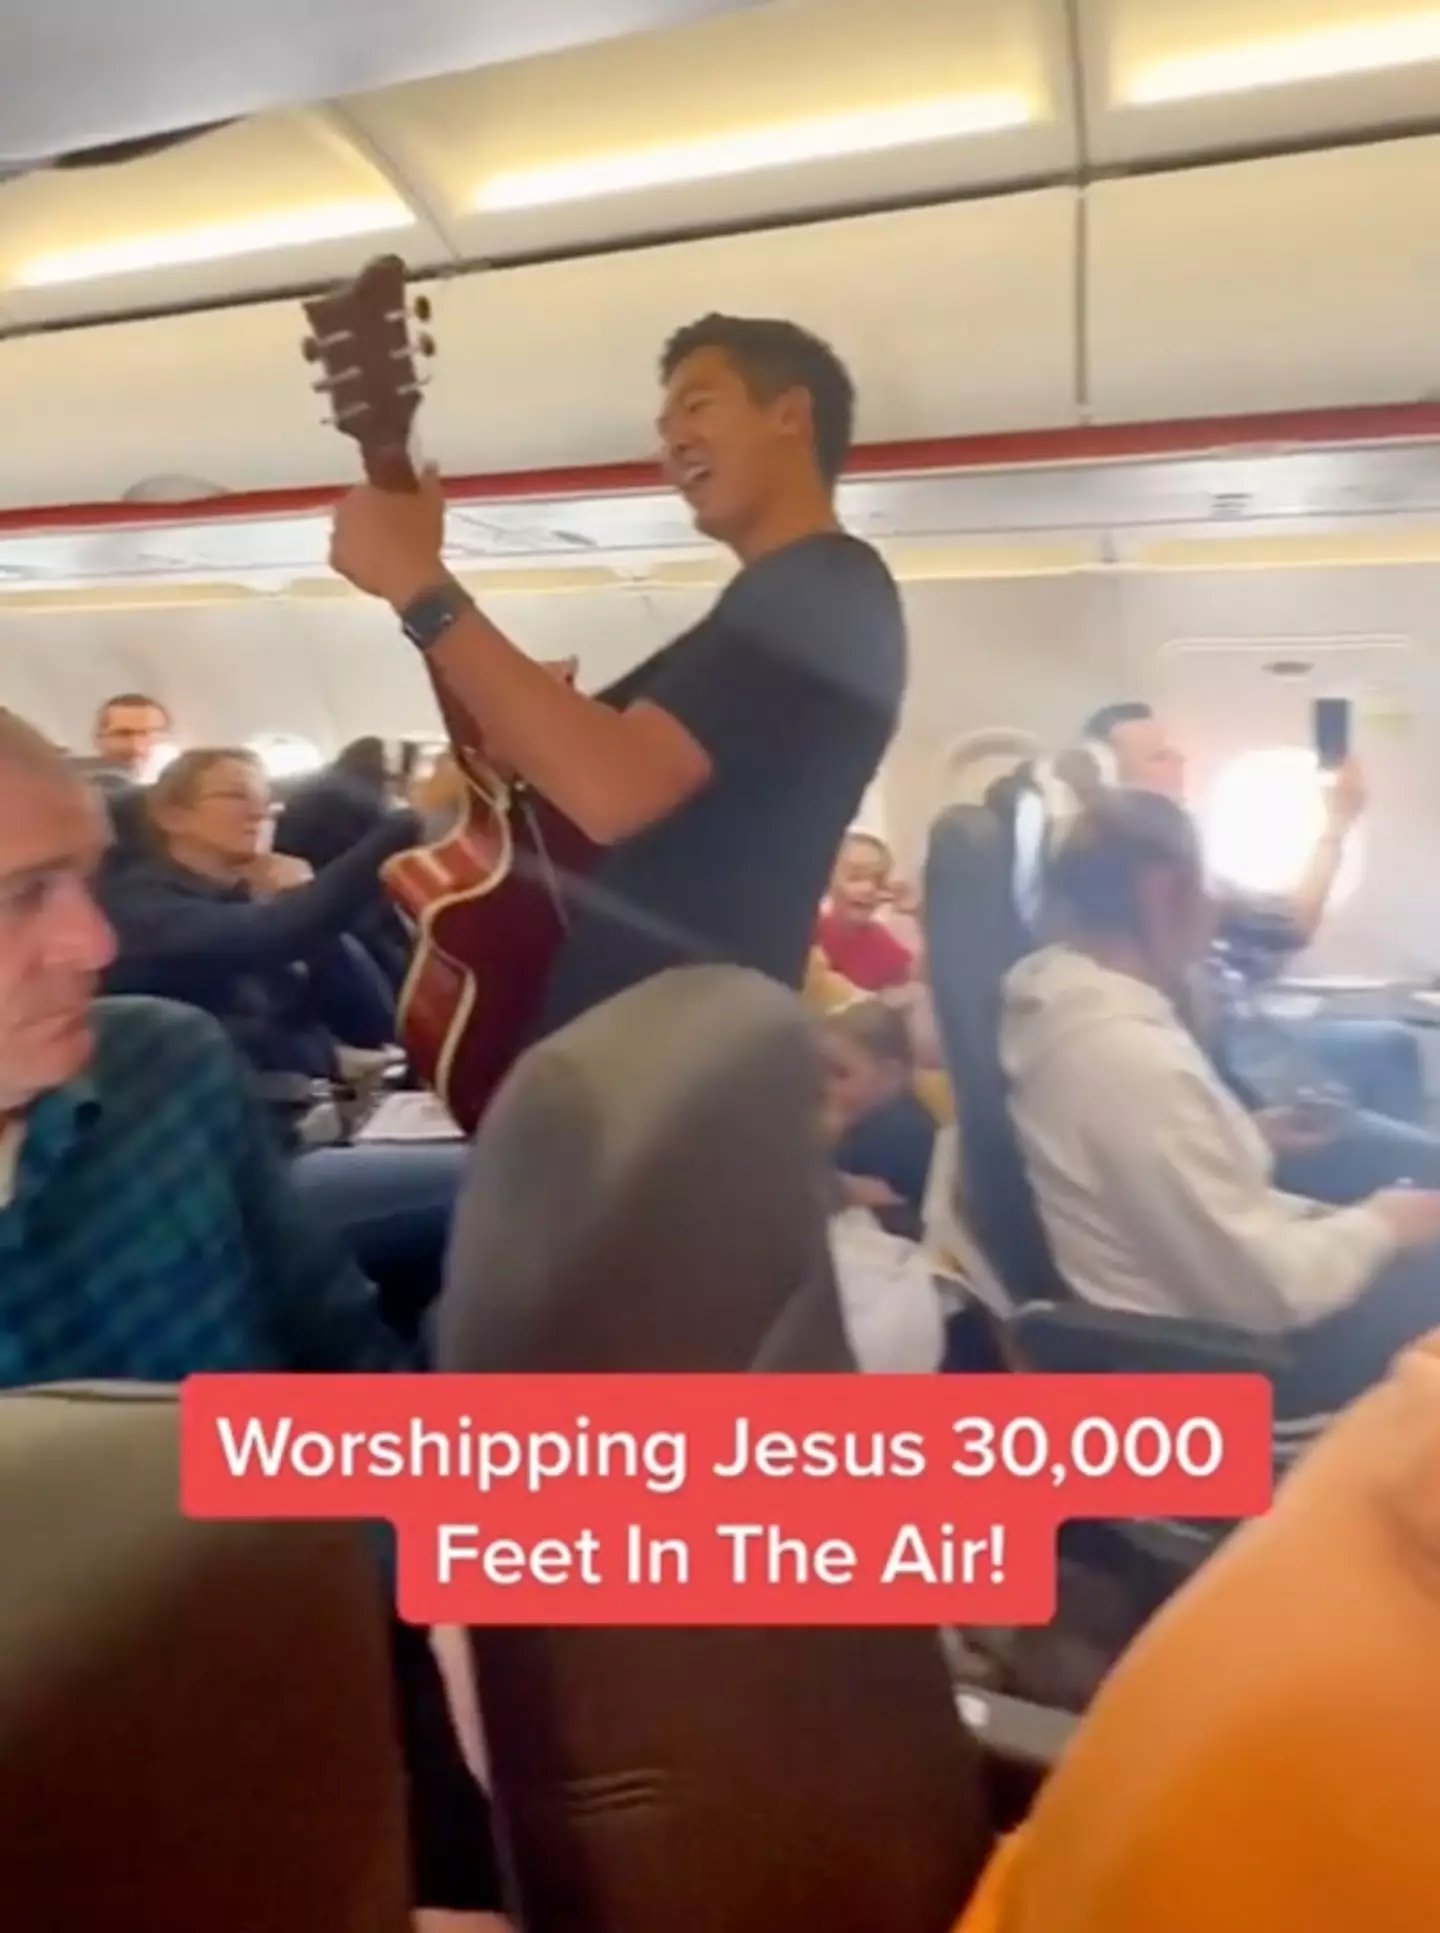 A group of singers decided to bust out some religiously themed tunes during a flight.